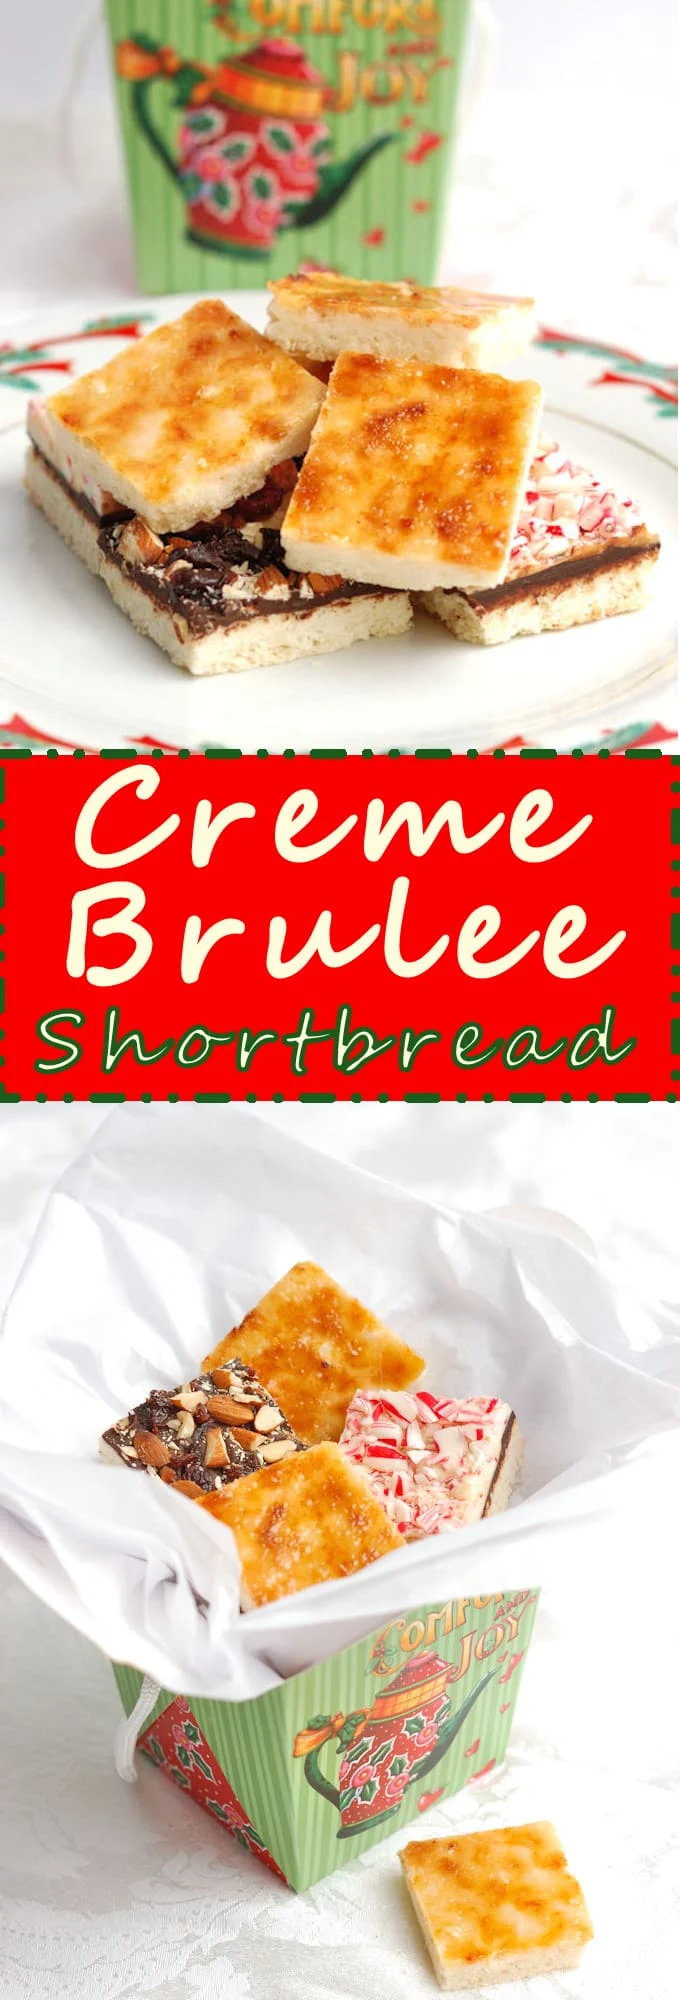 Crackly, crispy caramelized crust makes this shortbread irresistible. The perfect addition to a holiday gift box